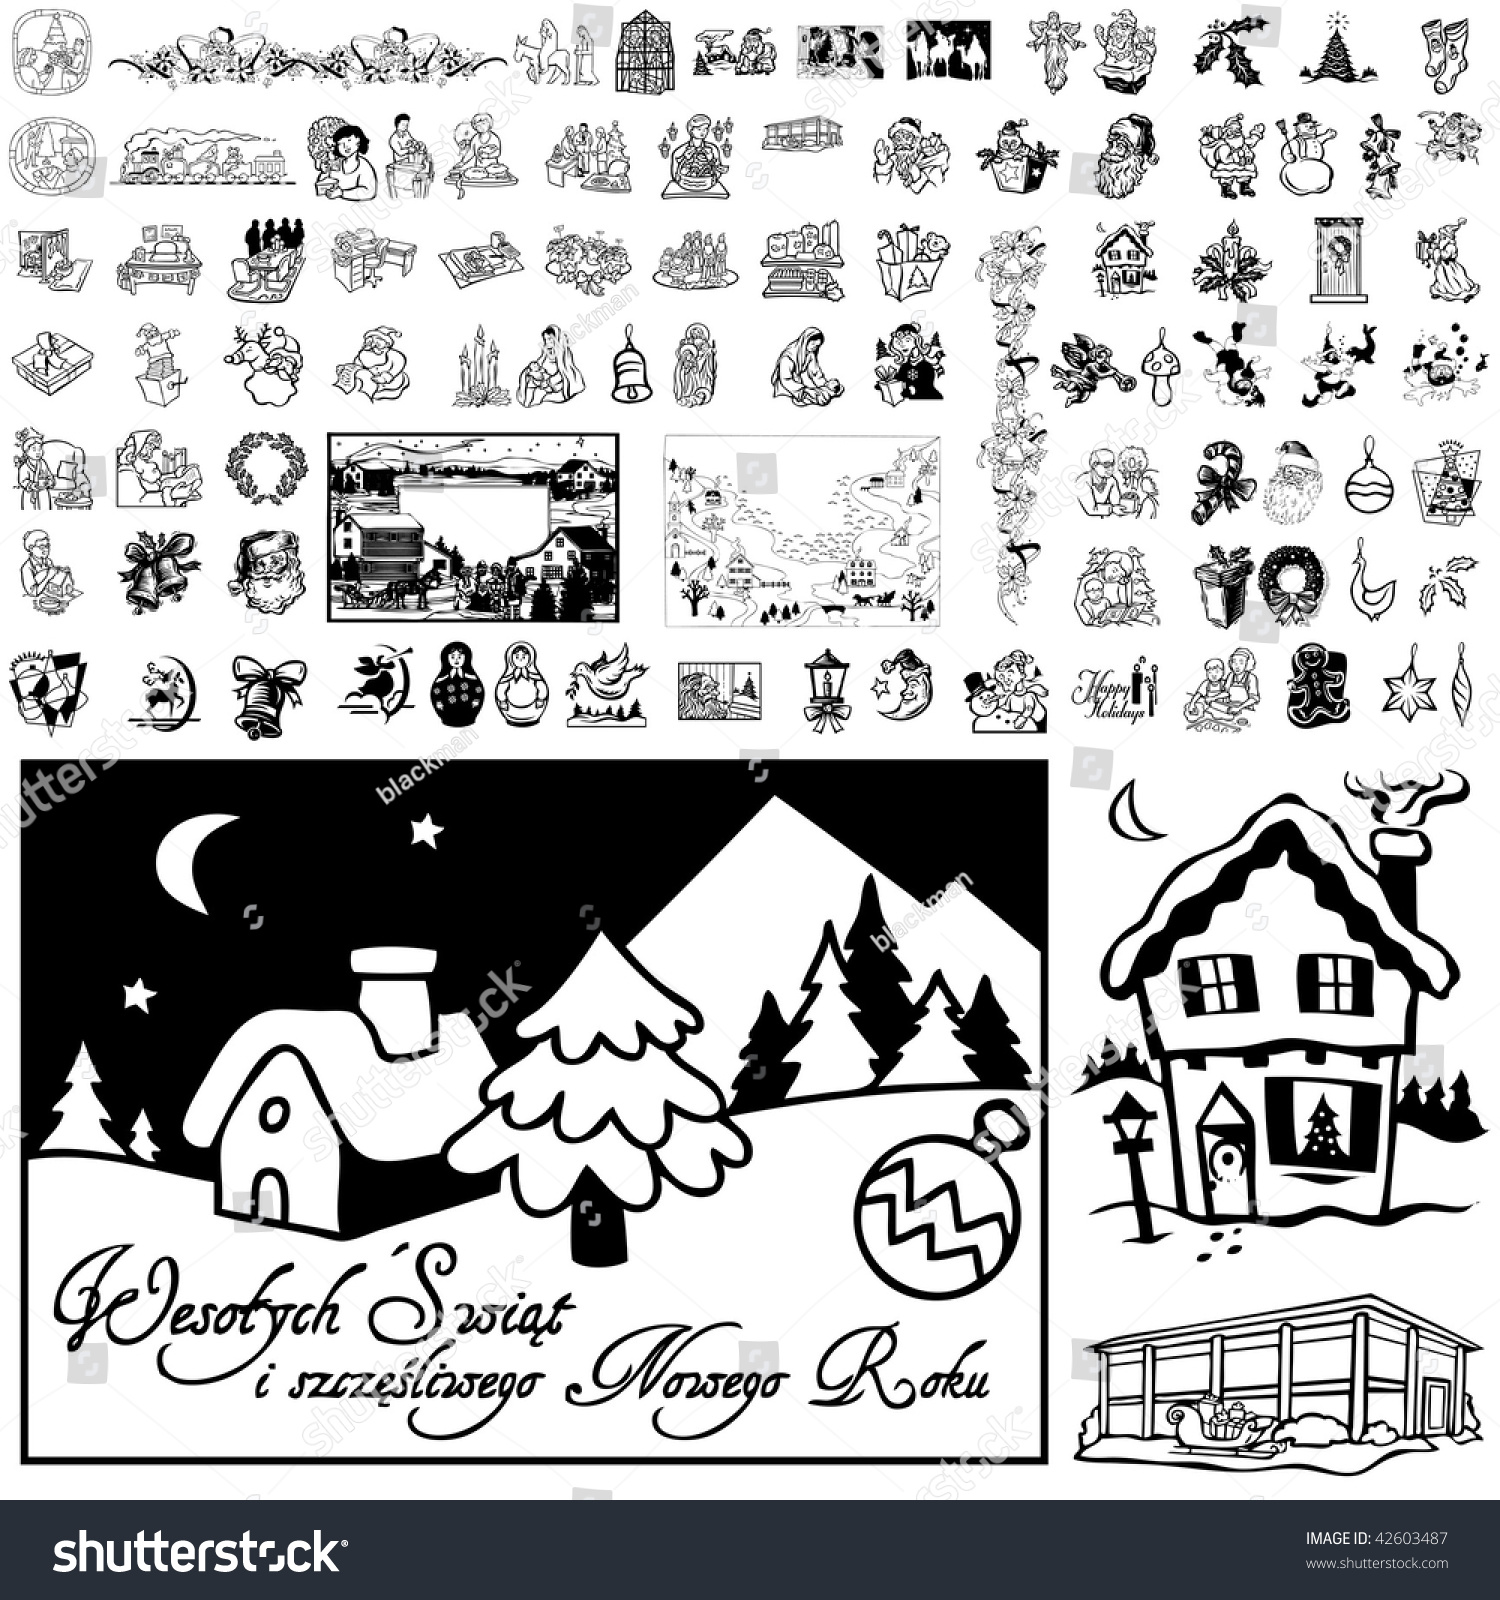 Christmas set of black sketch. Part 102-11. Isolated groups and layers. #42603487